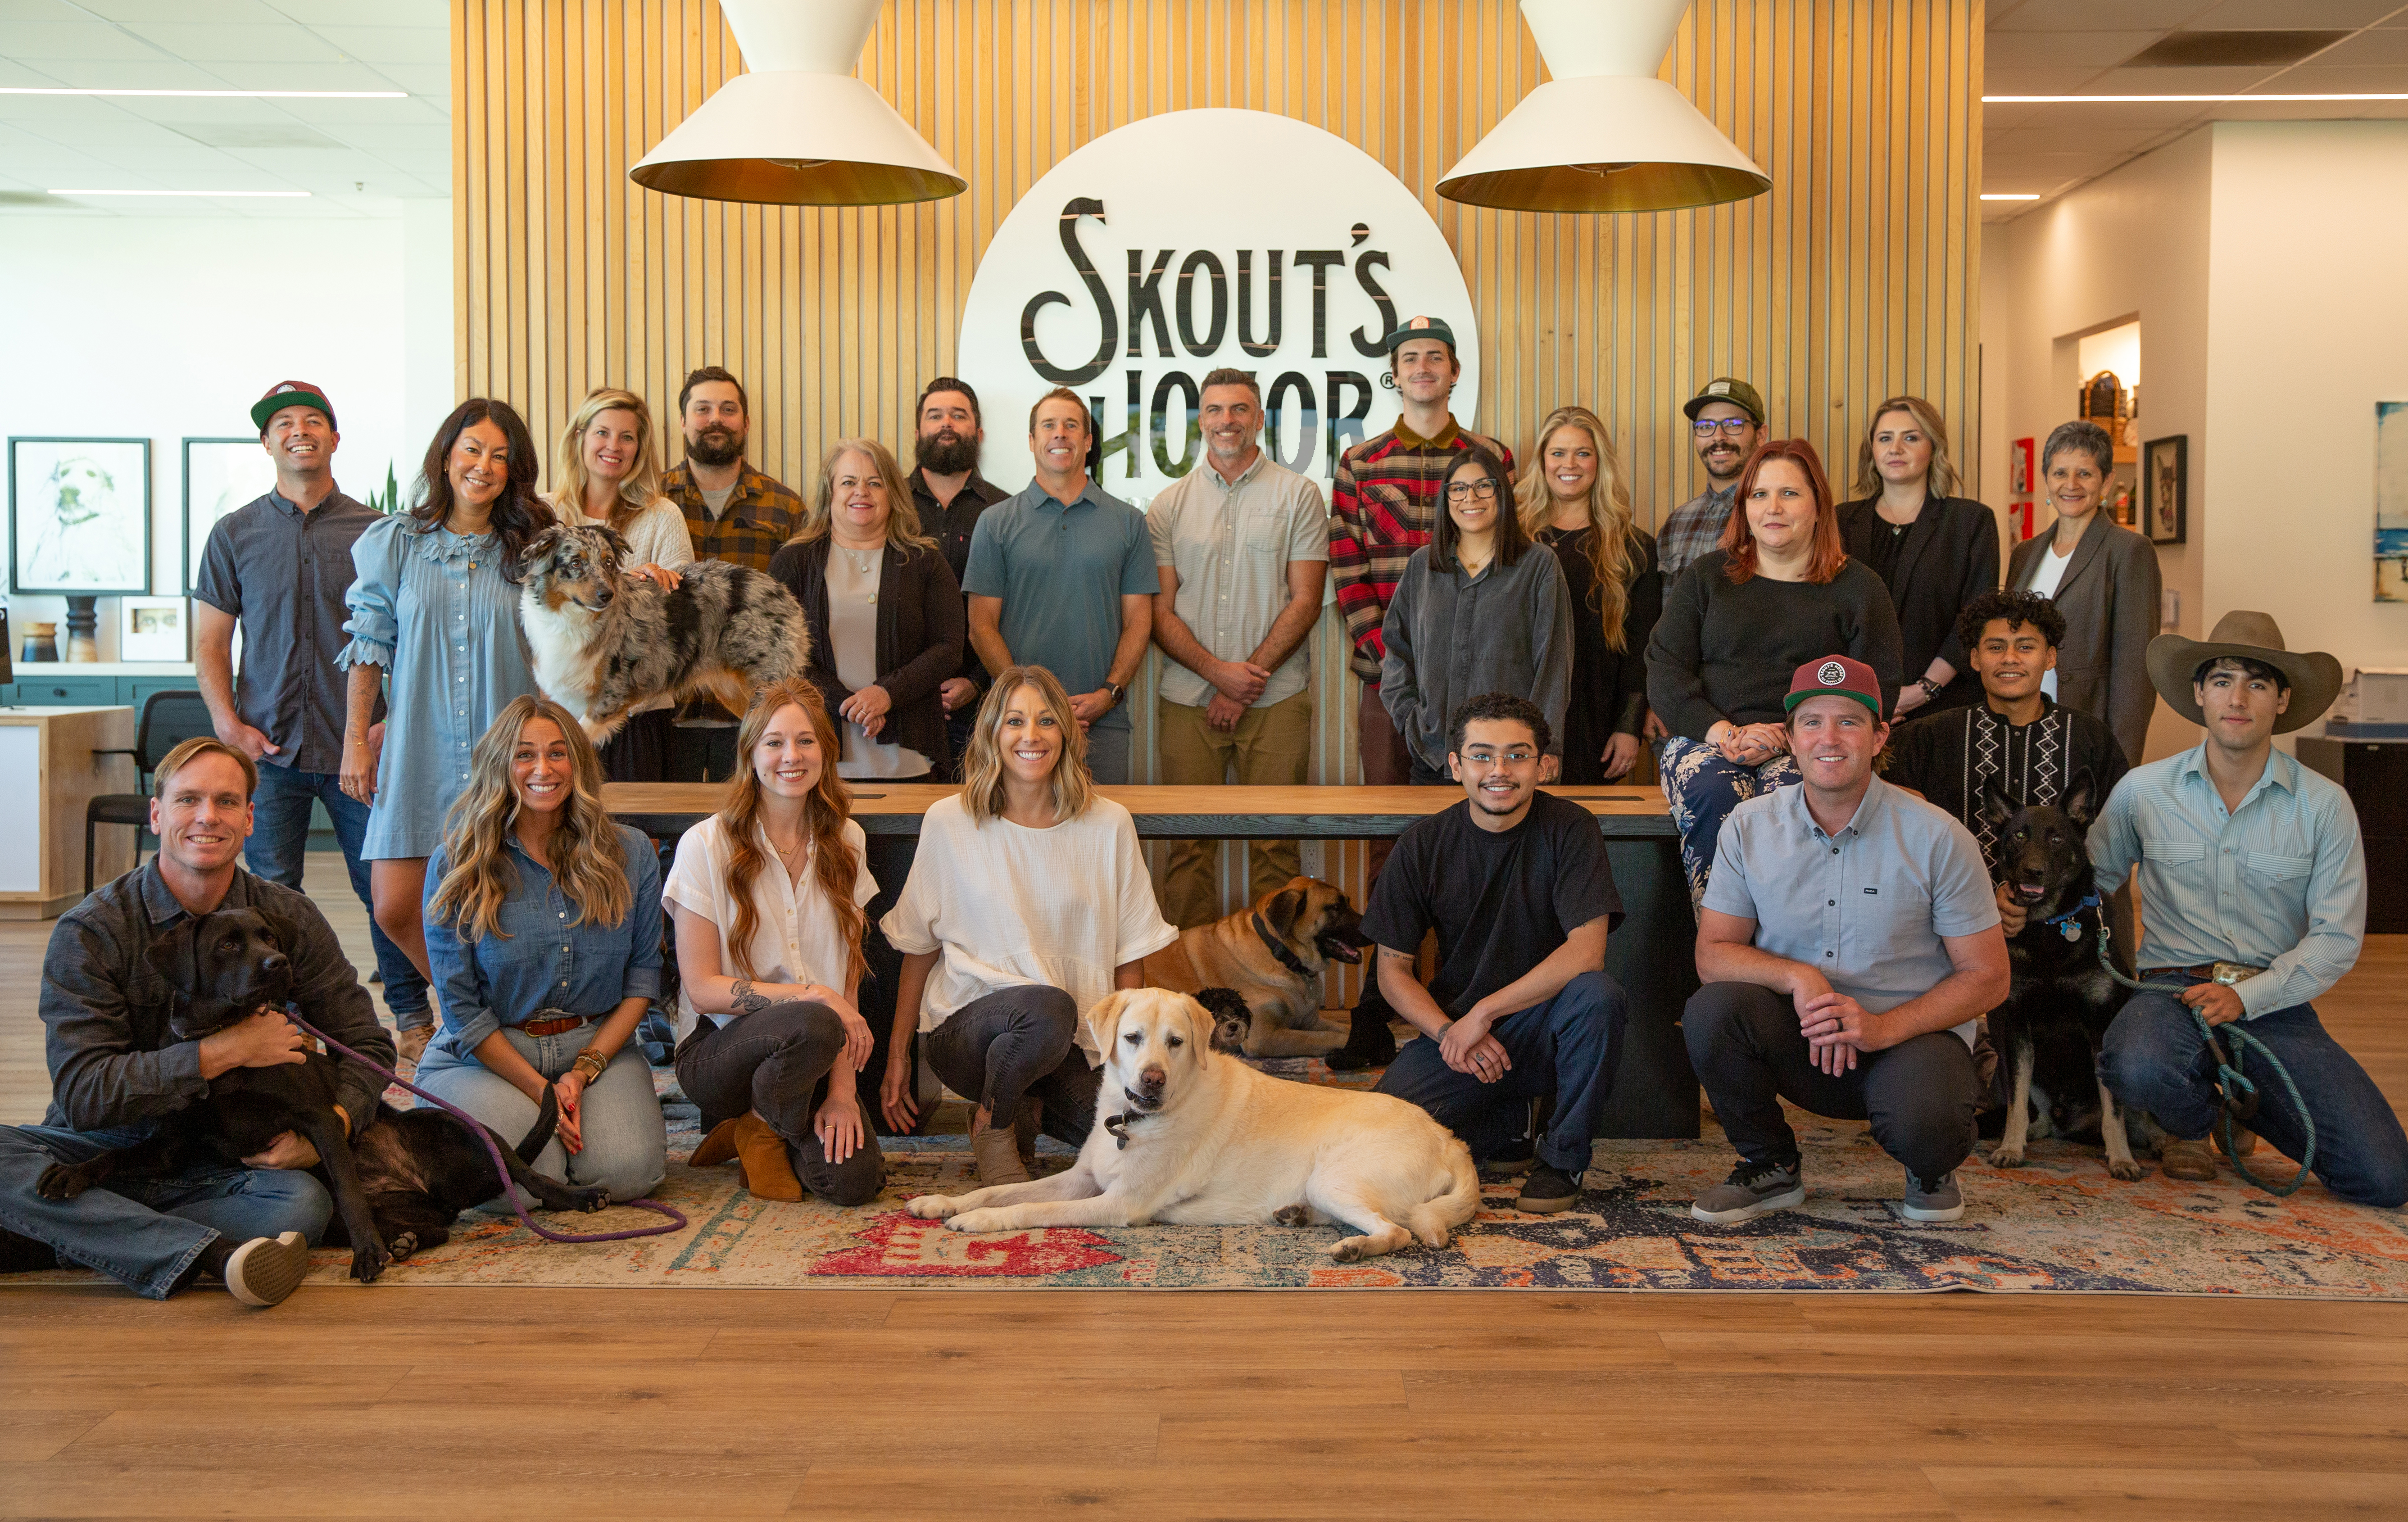 15 million meals donated by skout's honor customers!